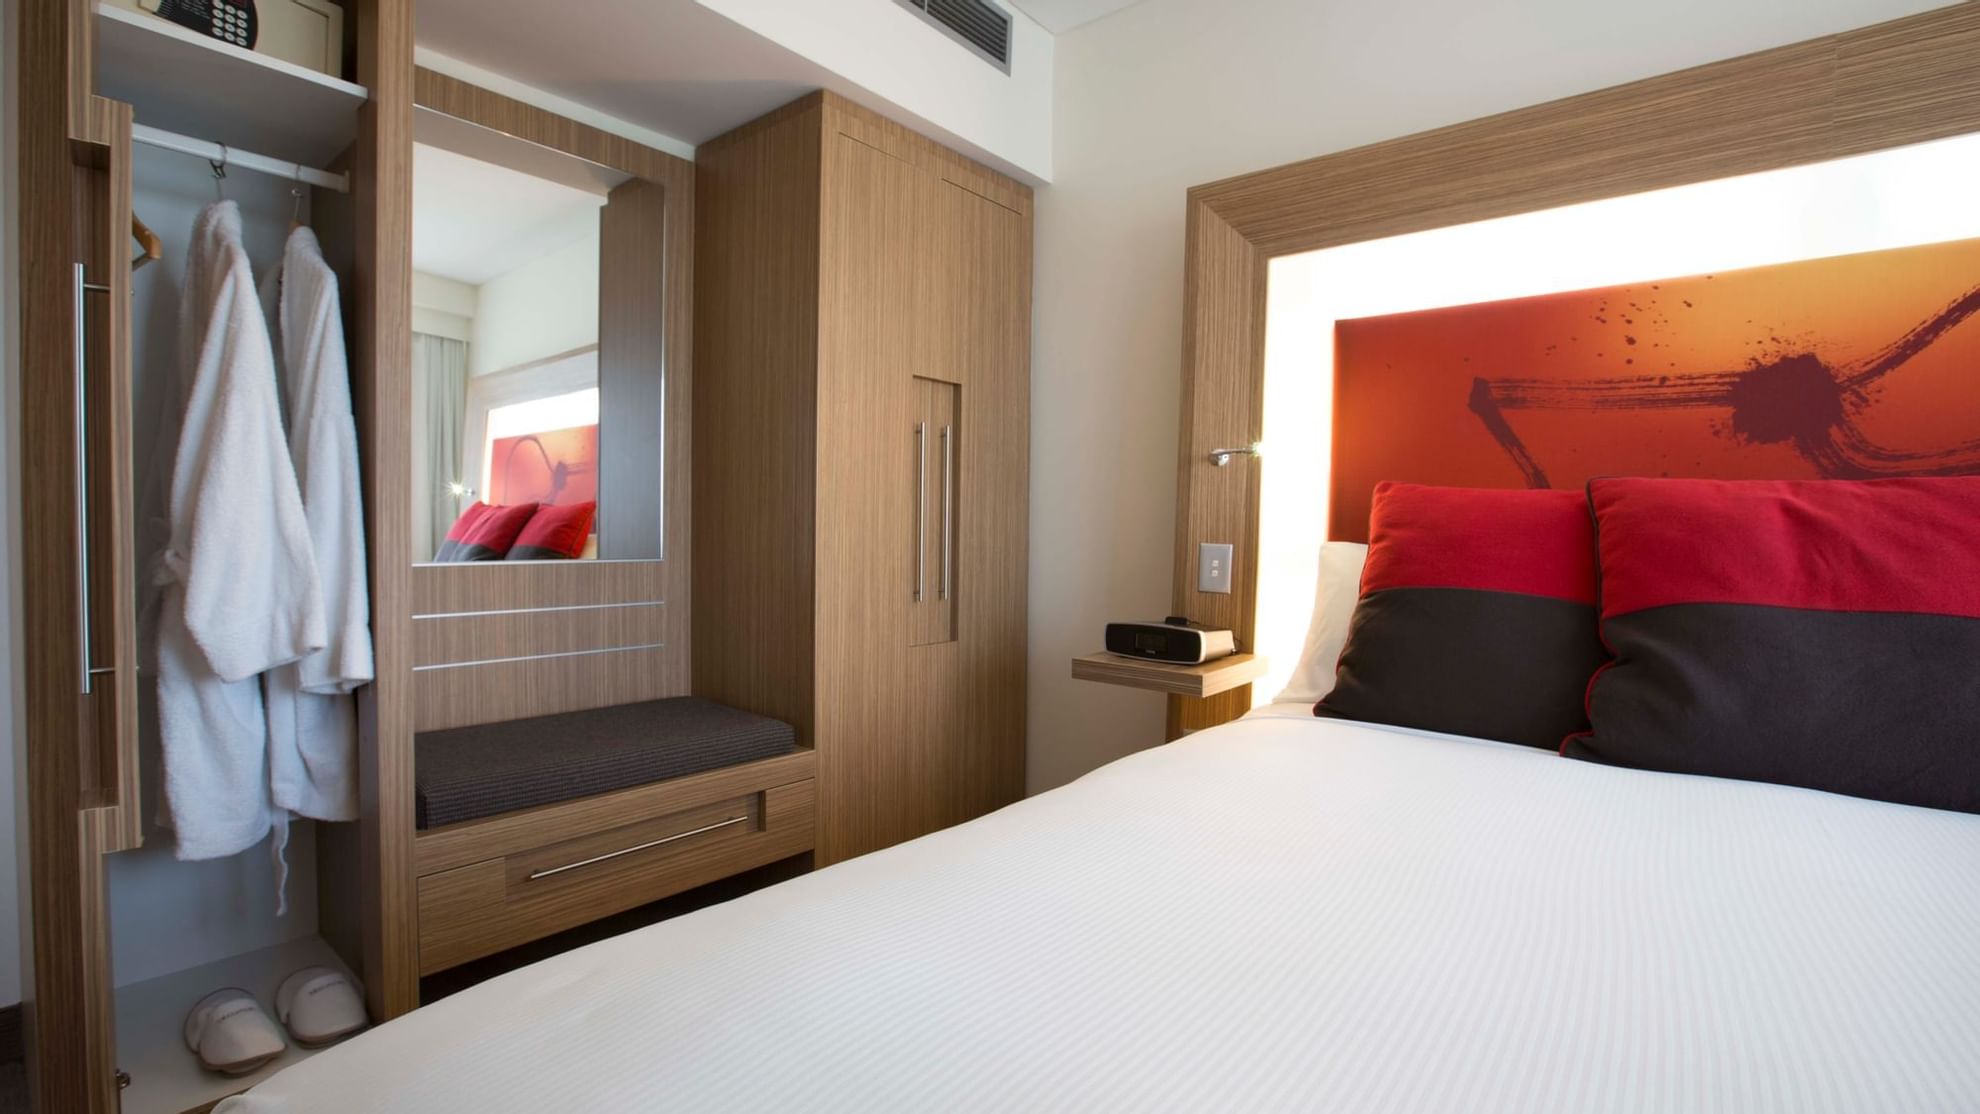 Bed & cupboard in Superior Spa Suites at Novotel Olympic Park